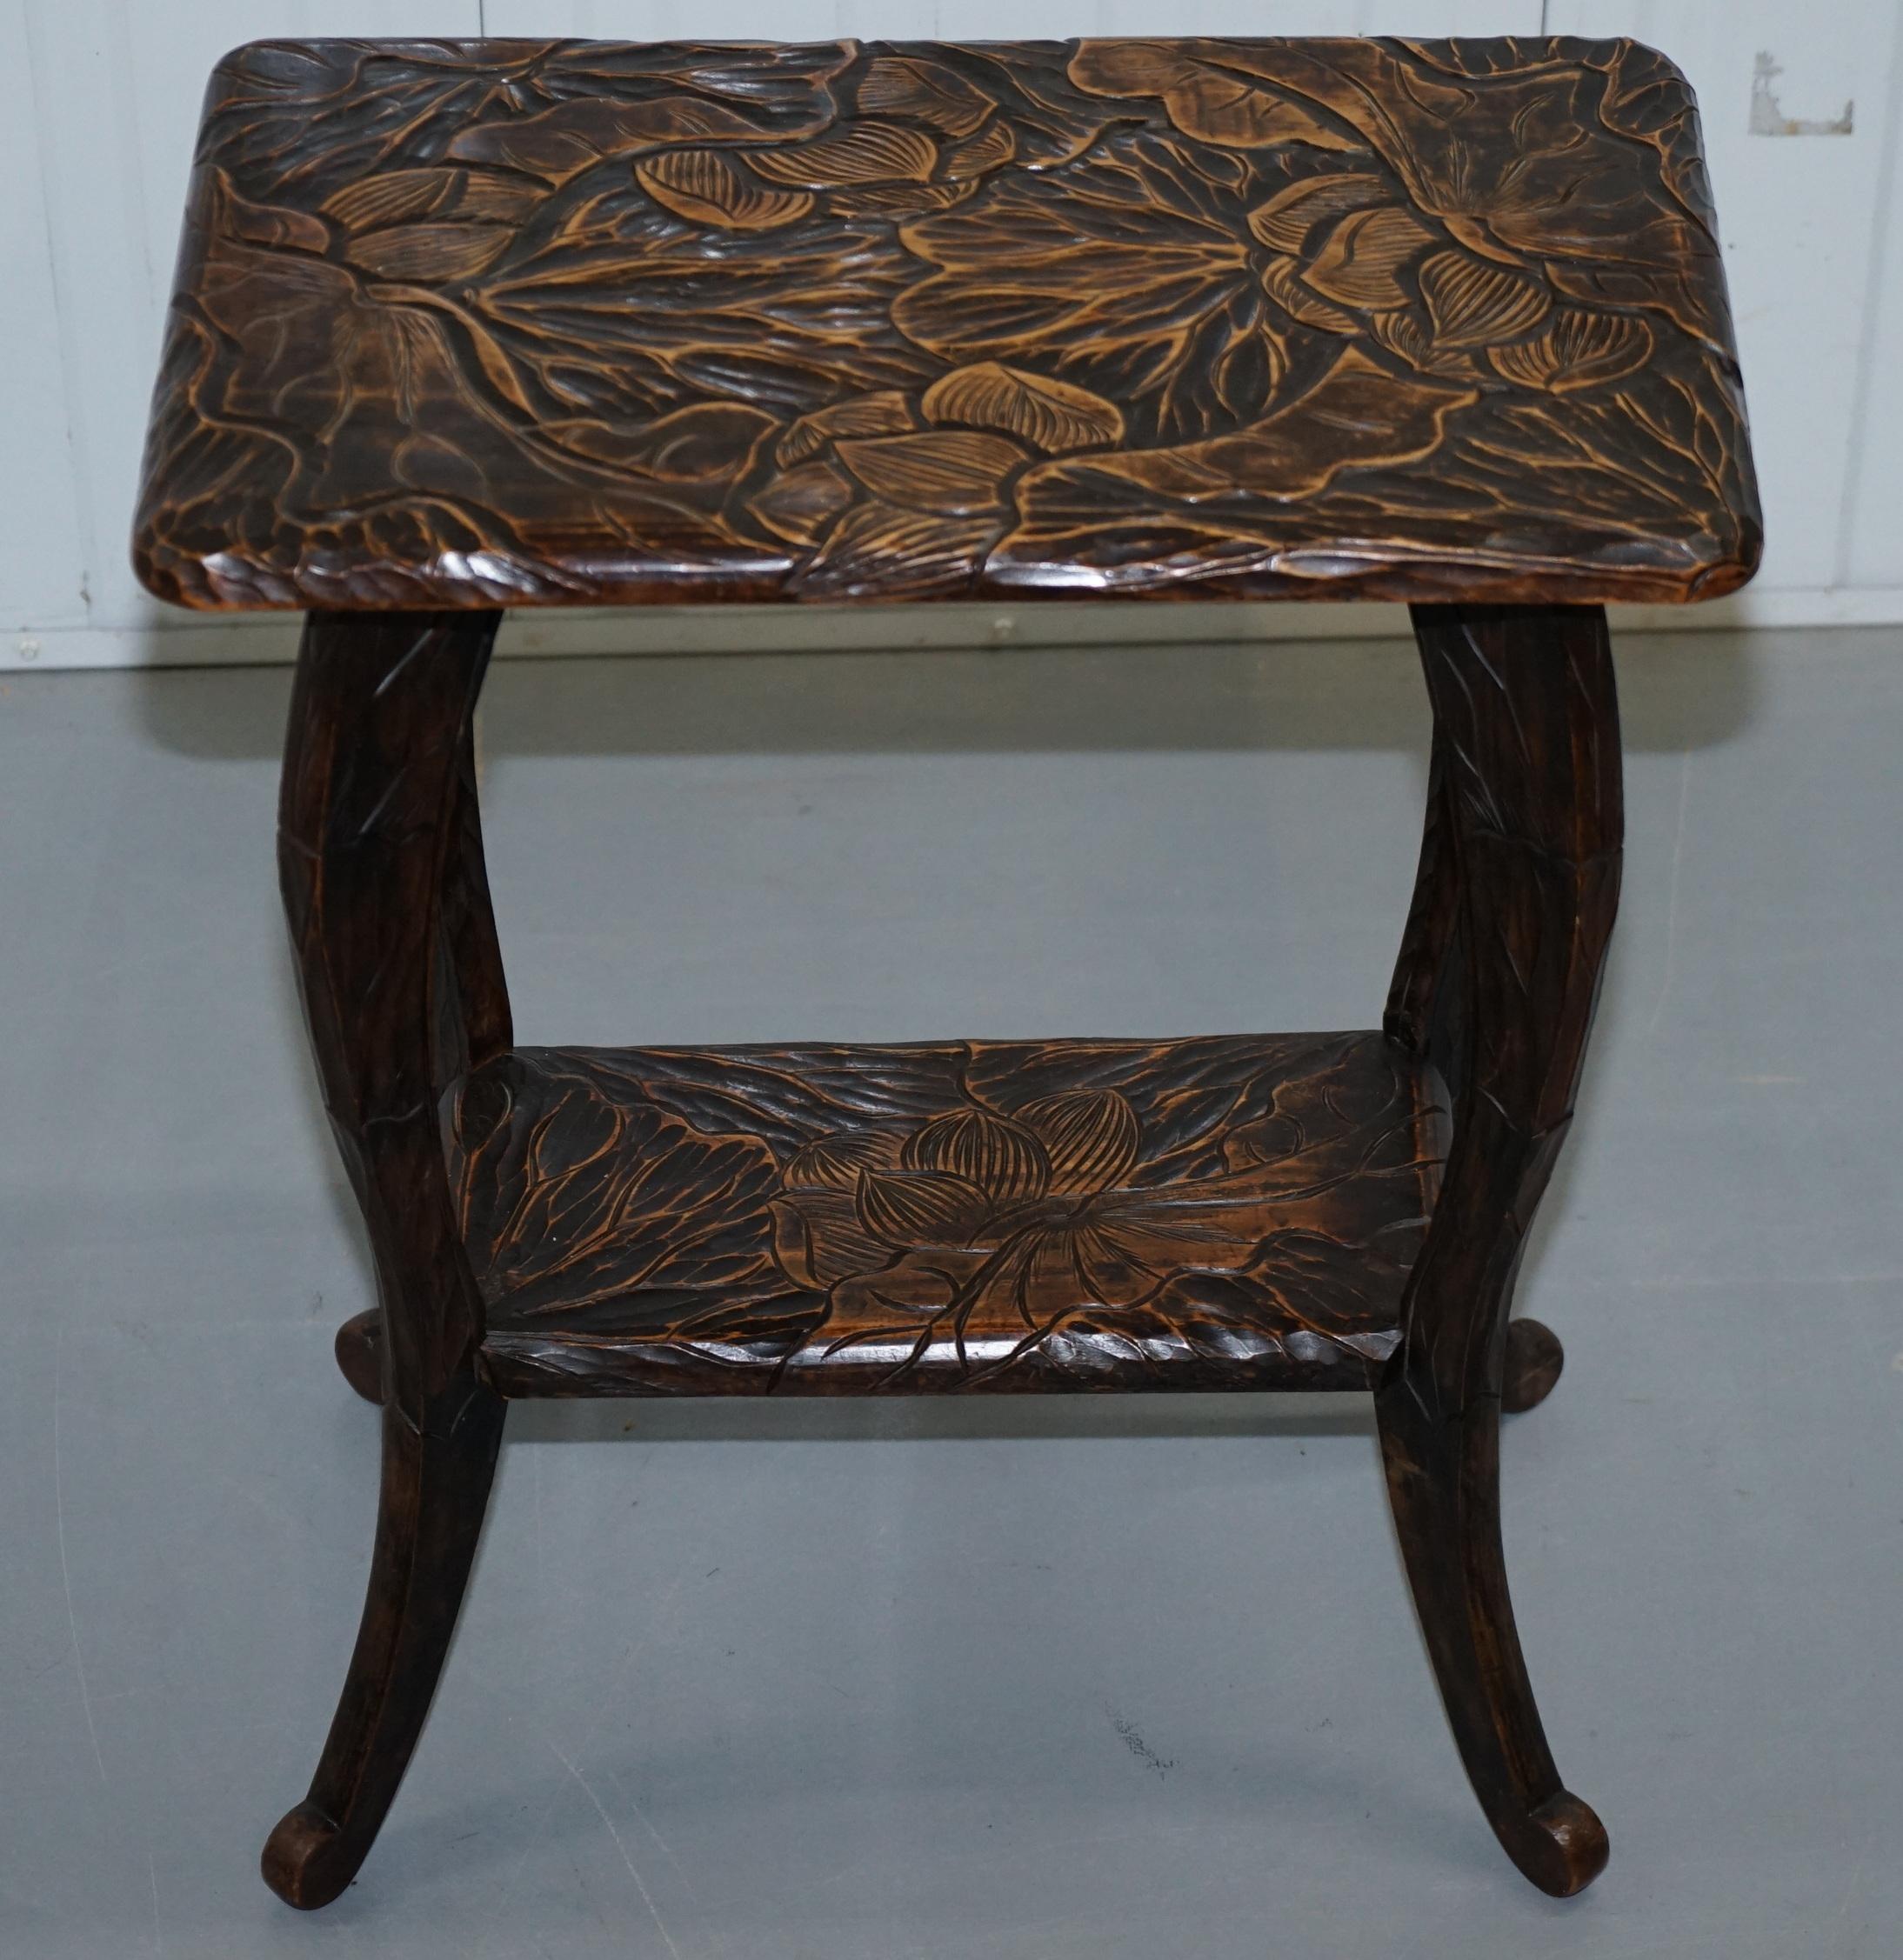 We are delighted to offer for sale this lovely Liberty & Co hand carved wood depicting floral foliage circa 1905

These tables were hand carved in Japan for Liberty & Co during the early 1900’s, they were commissioned by Liberty as part of their